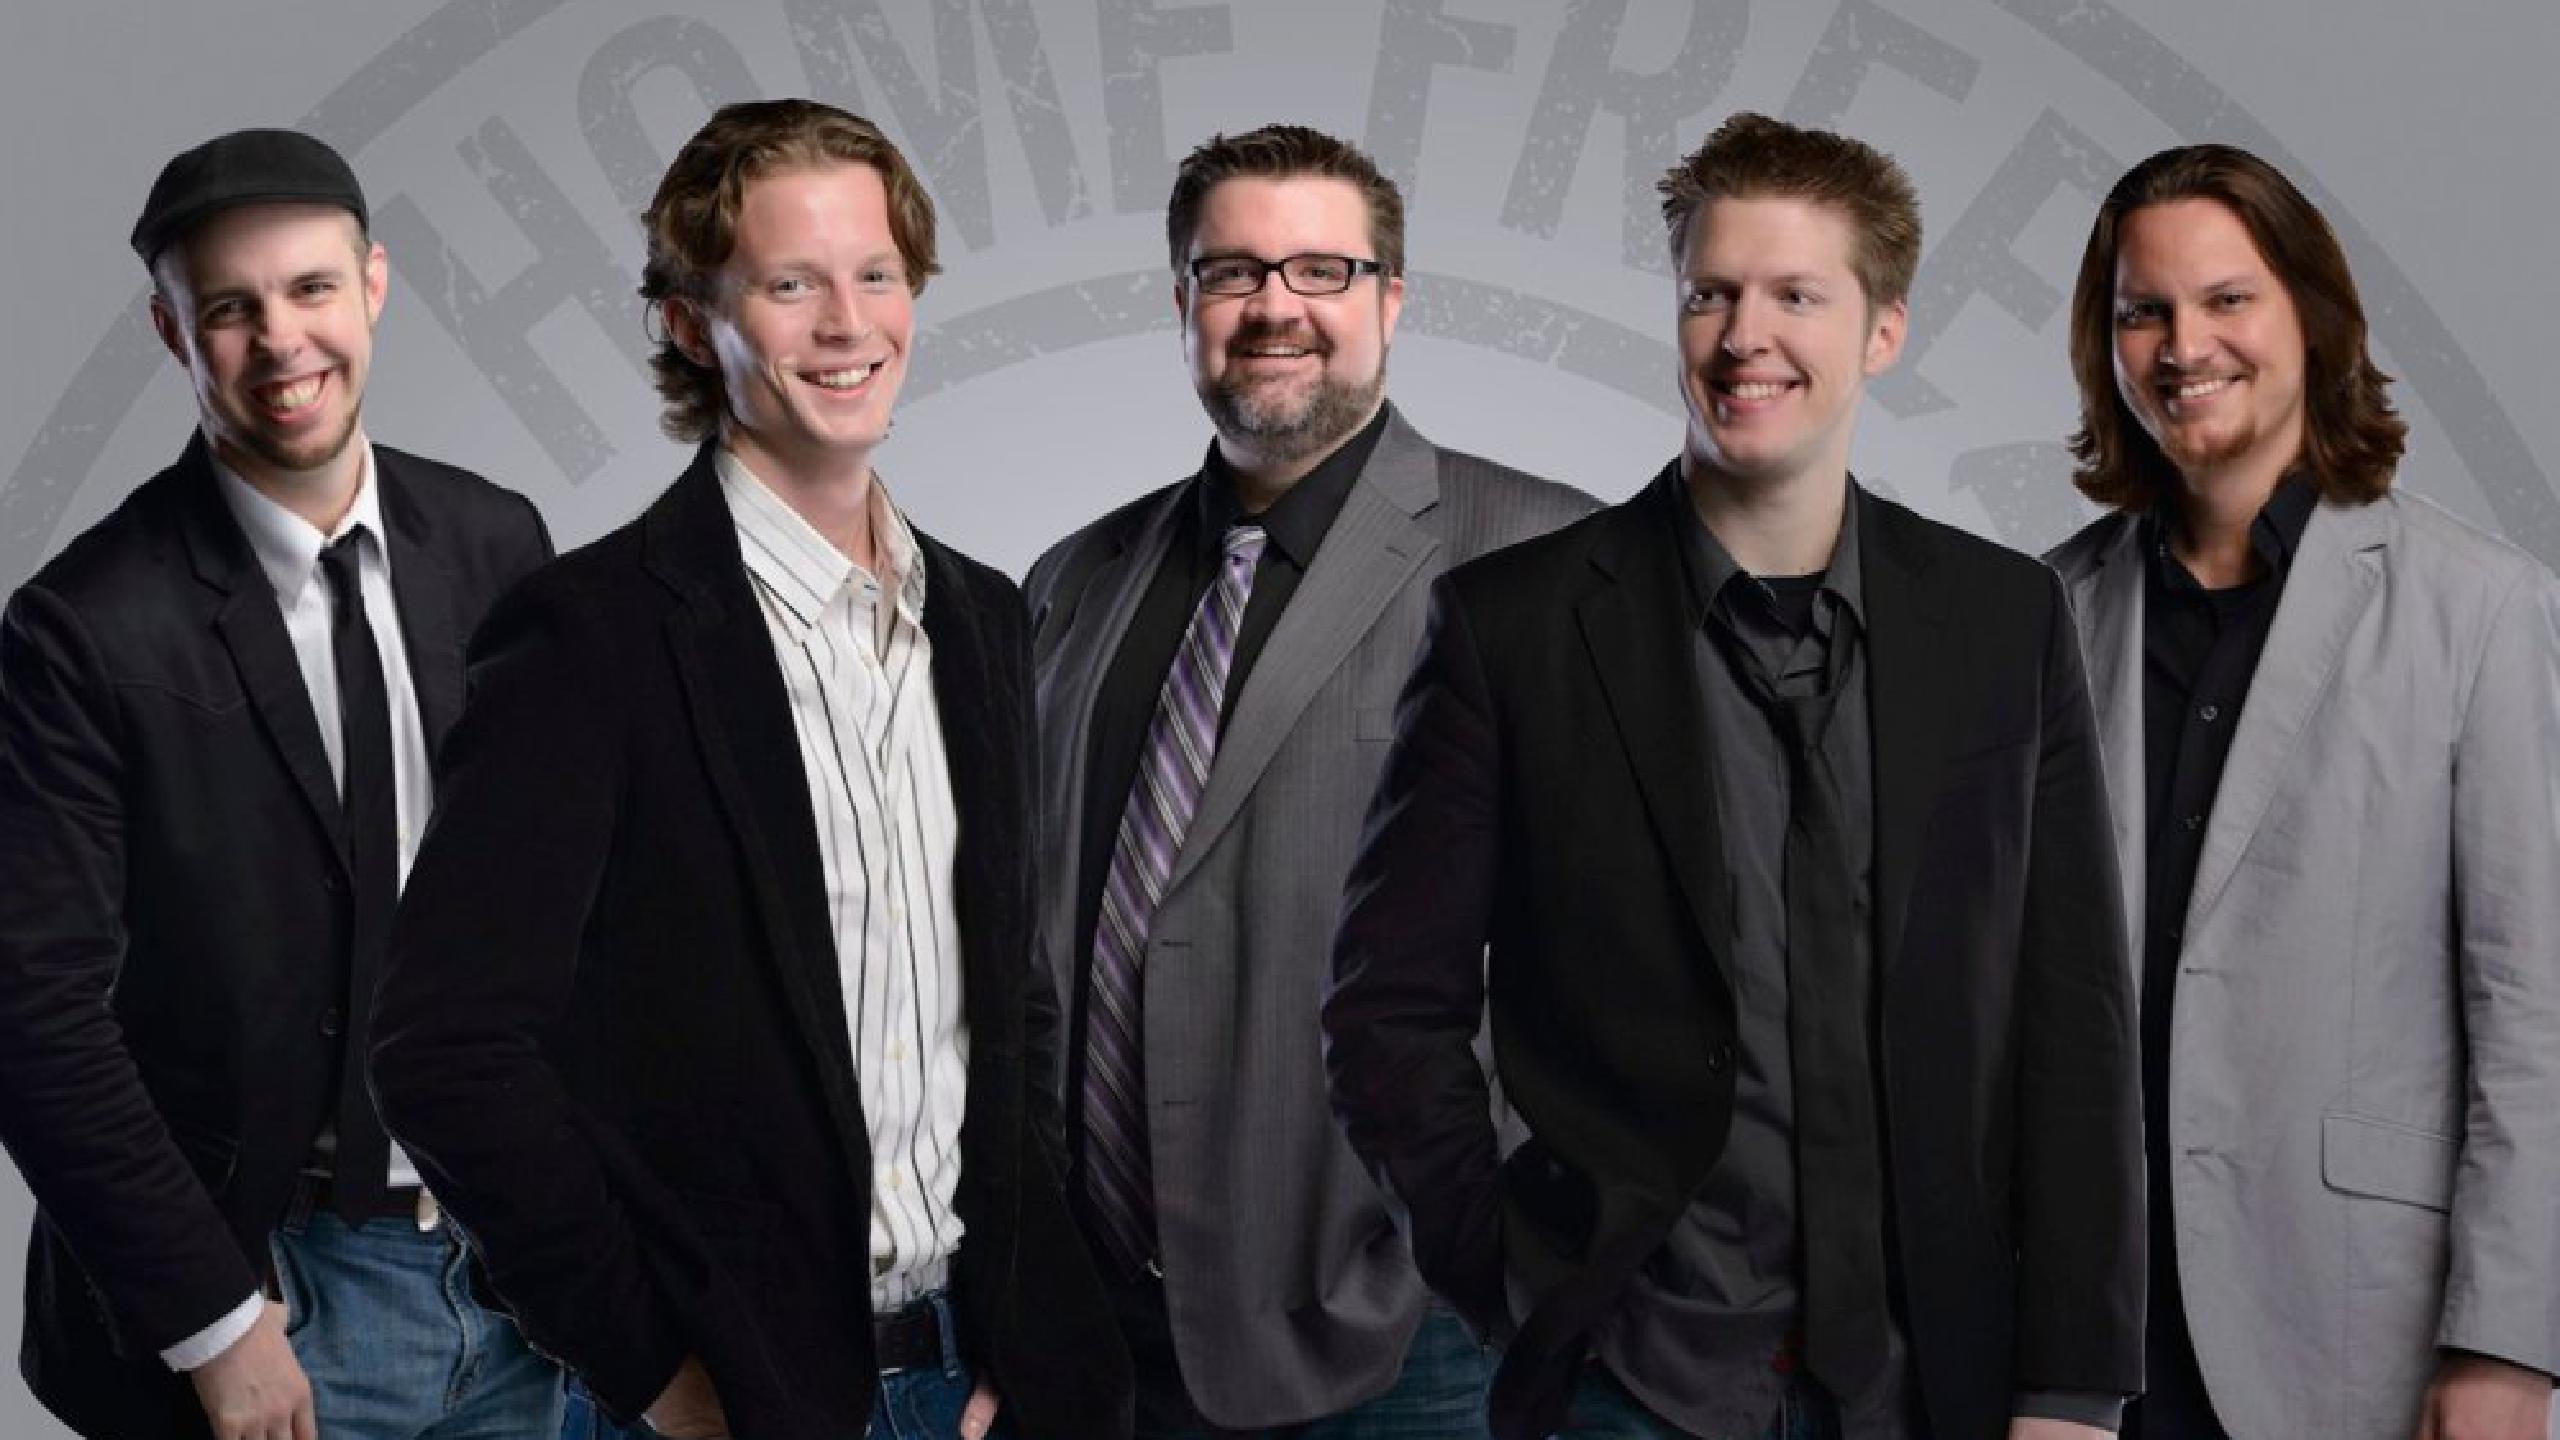 home free tour schedule